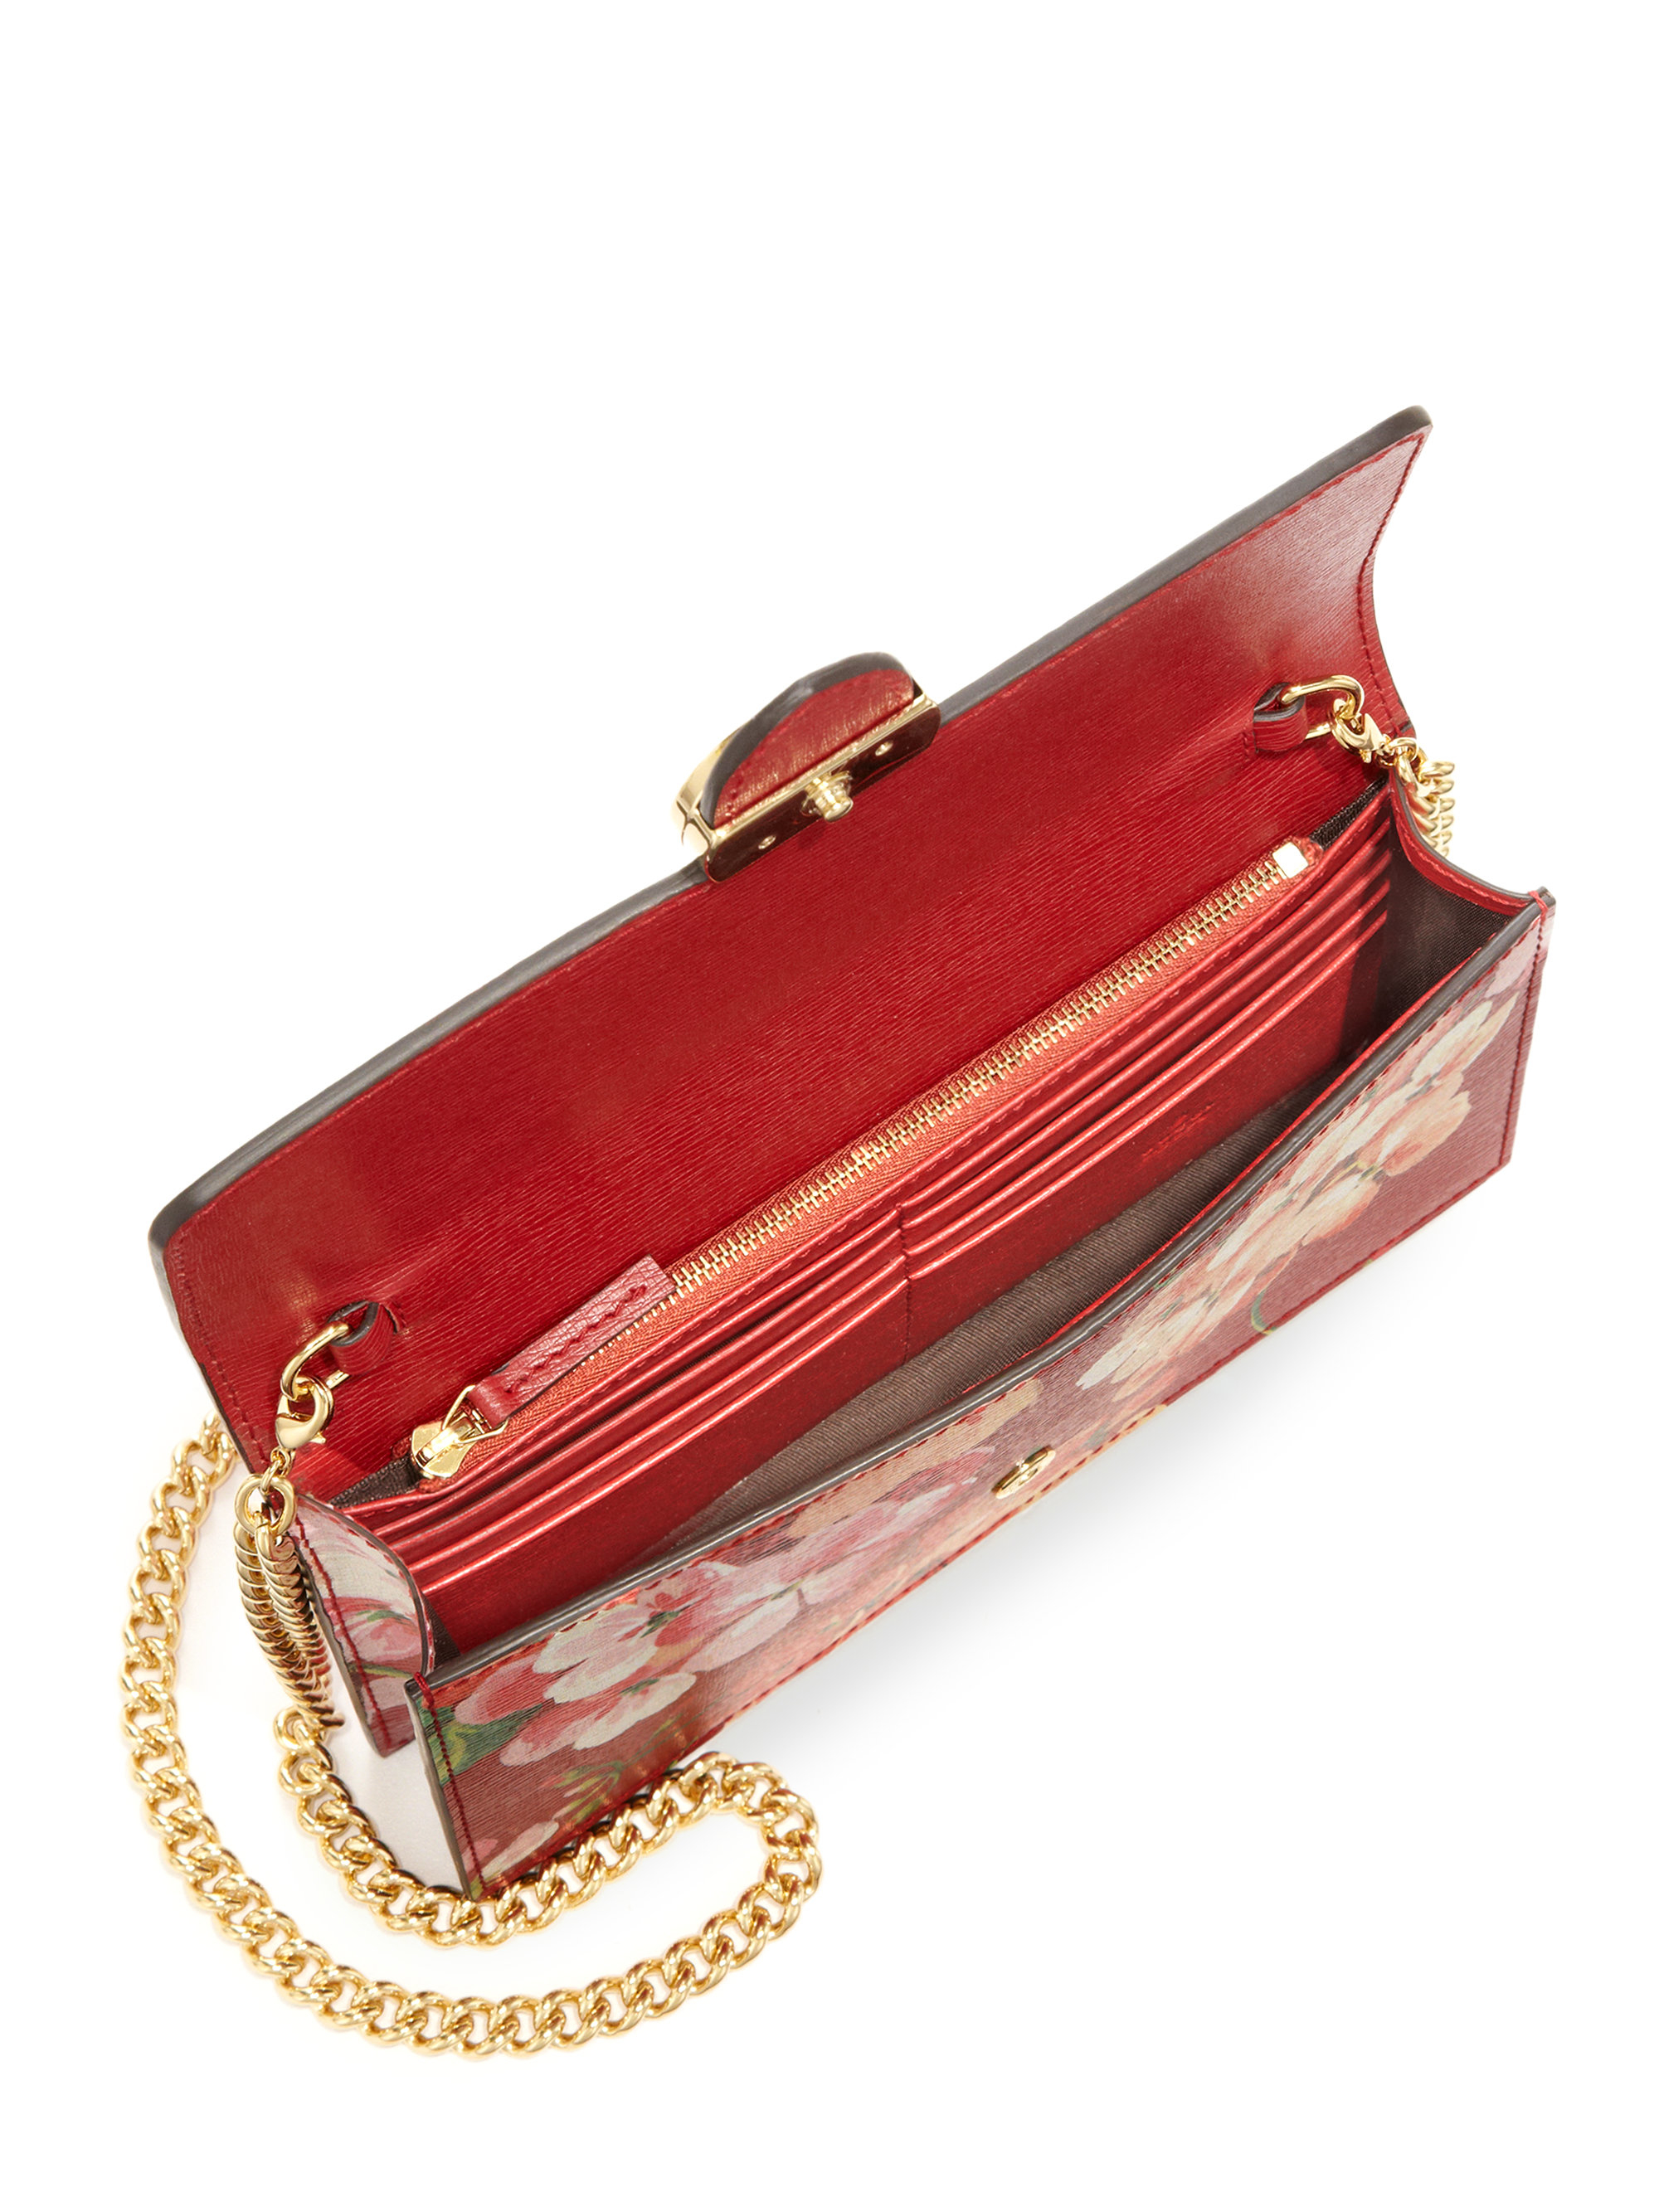 Gucci Shanghai Blooms Leather Chain Wallet in Red - Lyst